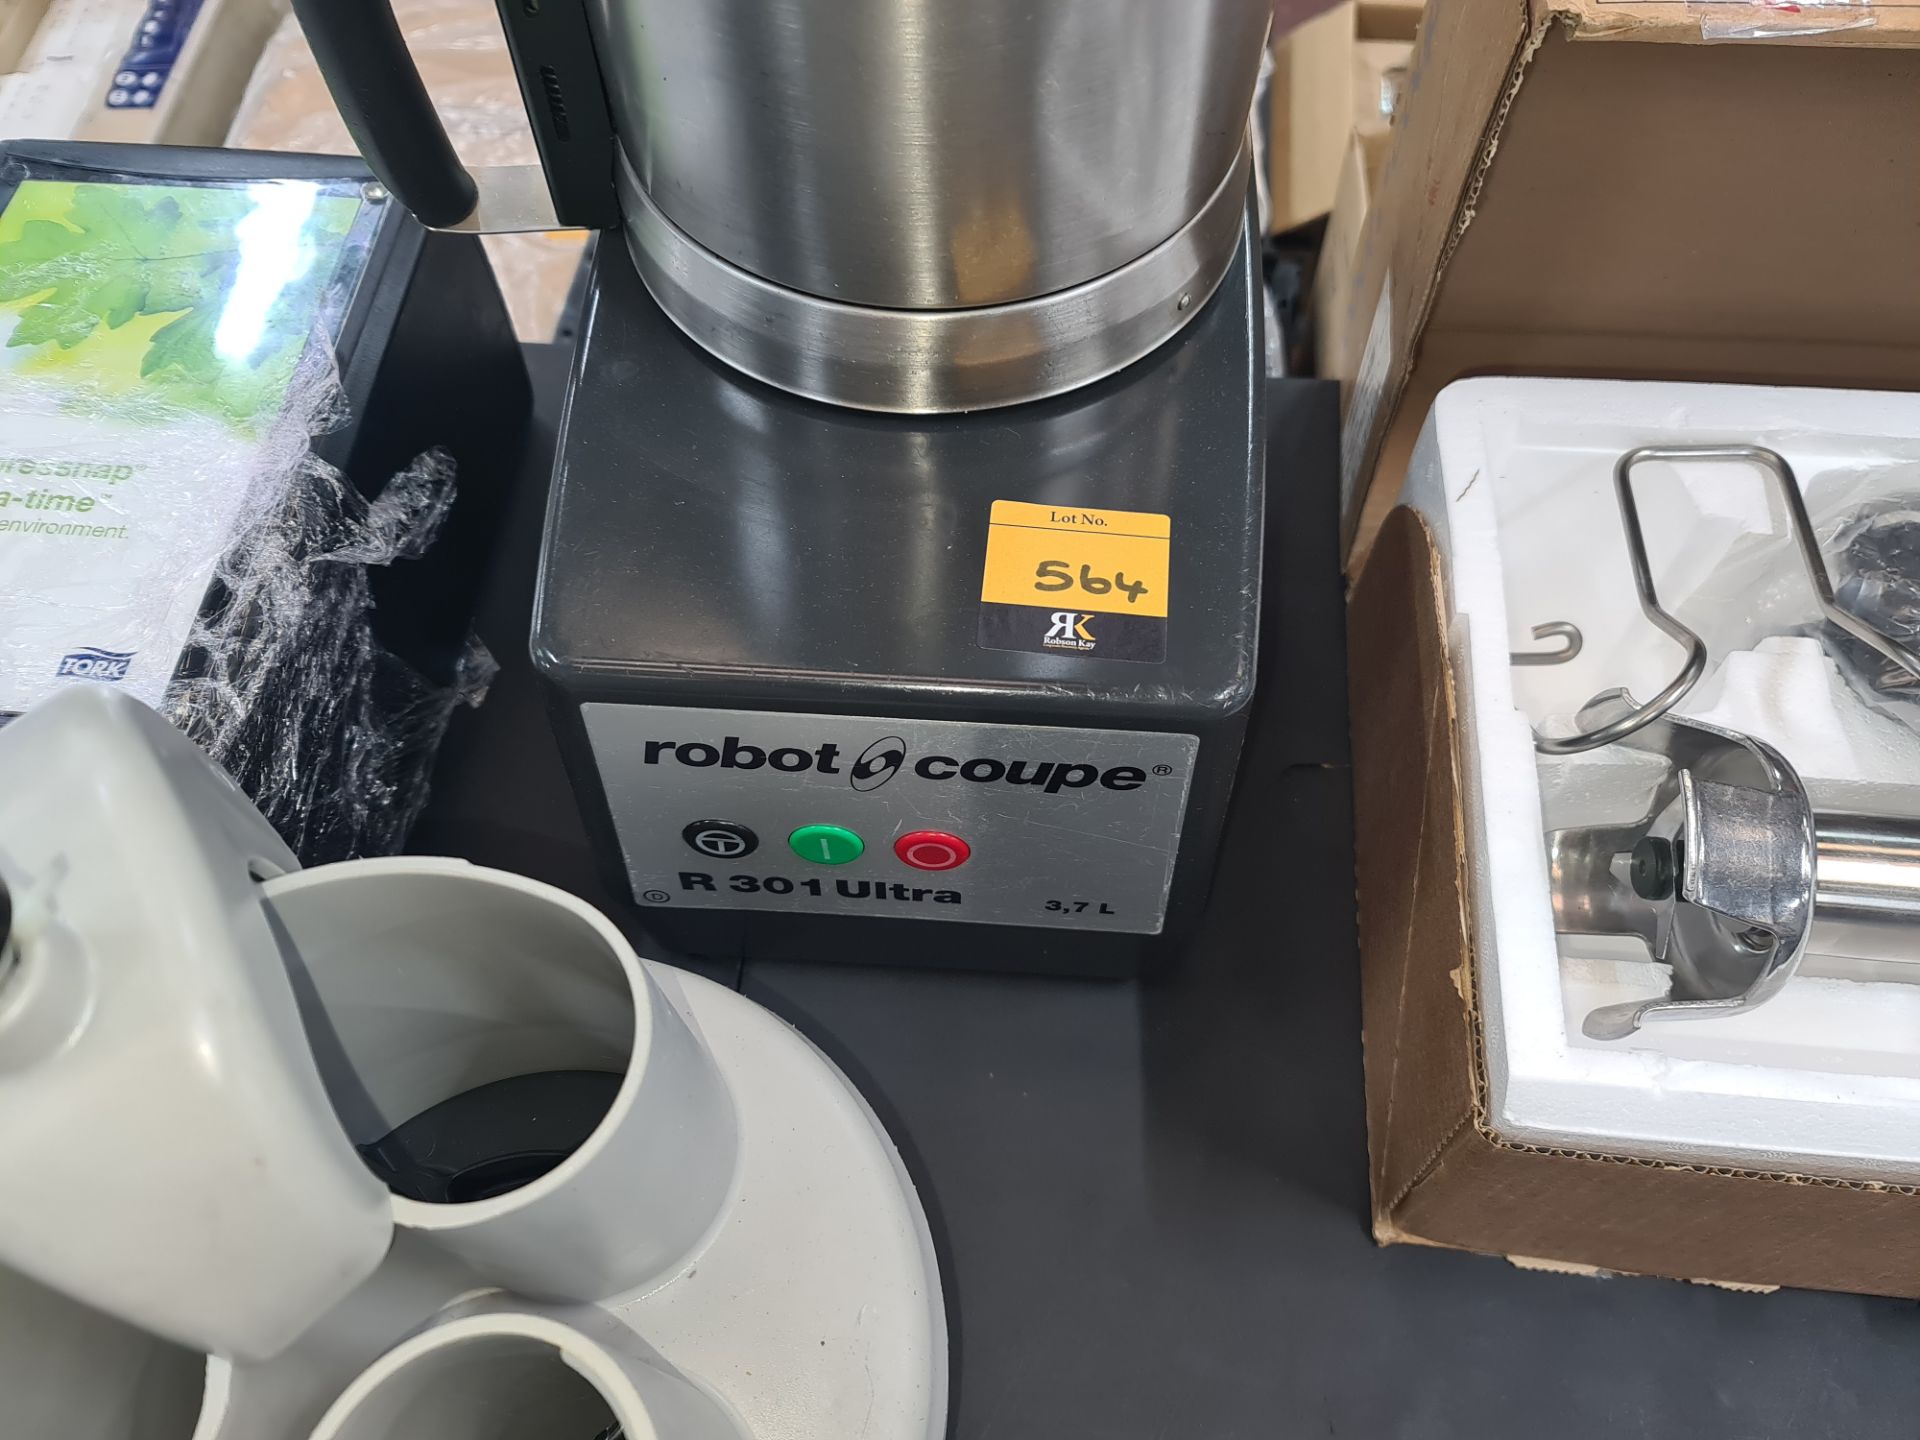 Robot Coupe food processor model R301 Ultra, 3.7 litres, including stainless steel bowl with blade & - Image 4 of 5